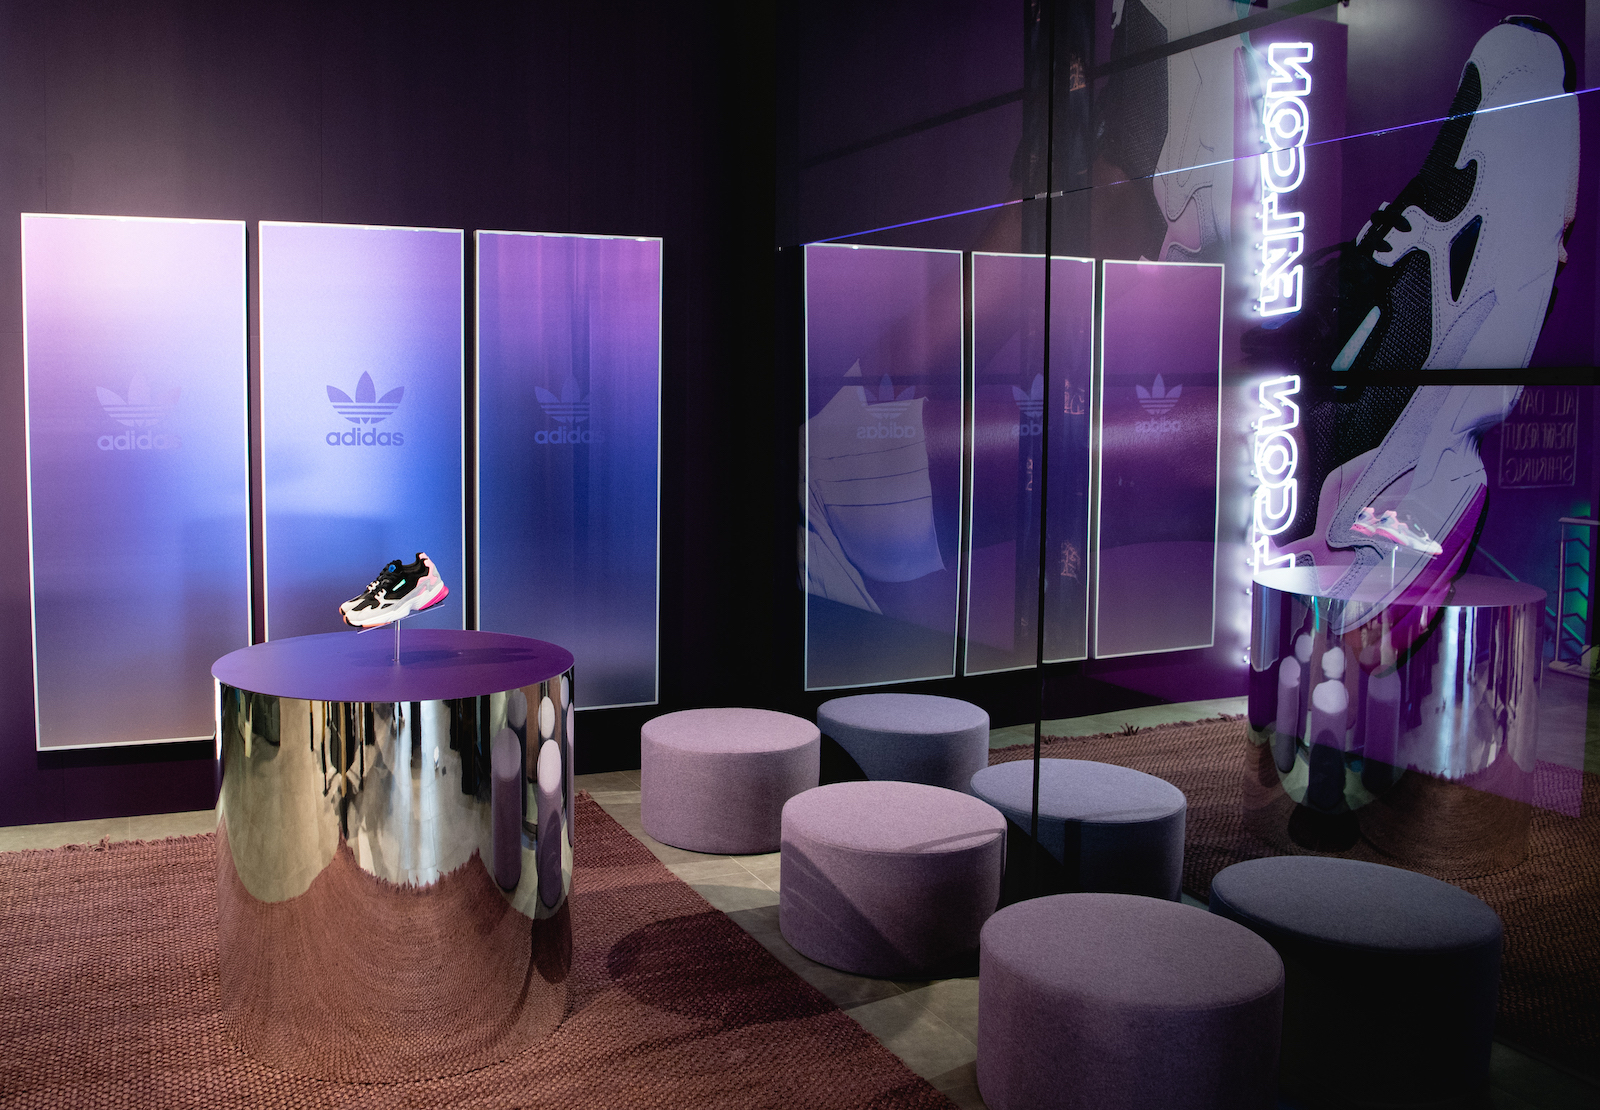 A  retail buildout with purple fogged glass, Falcon in neon, with shoes popped off a reflective cylinder pedestal.